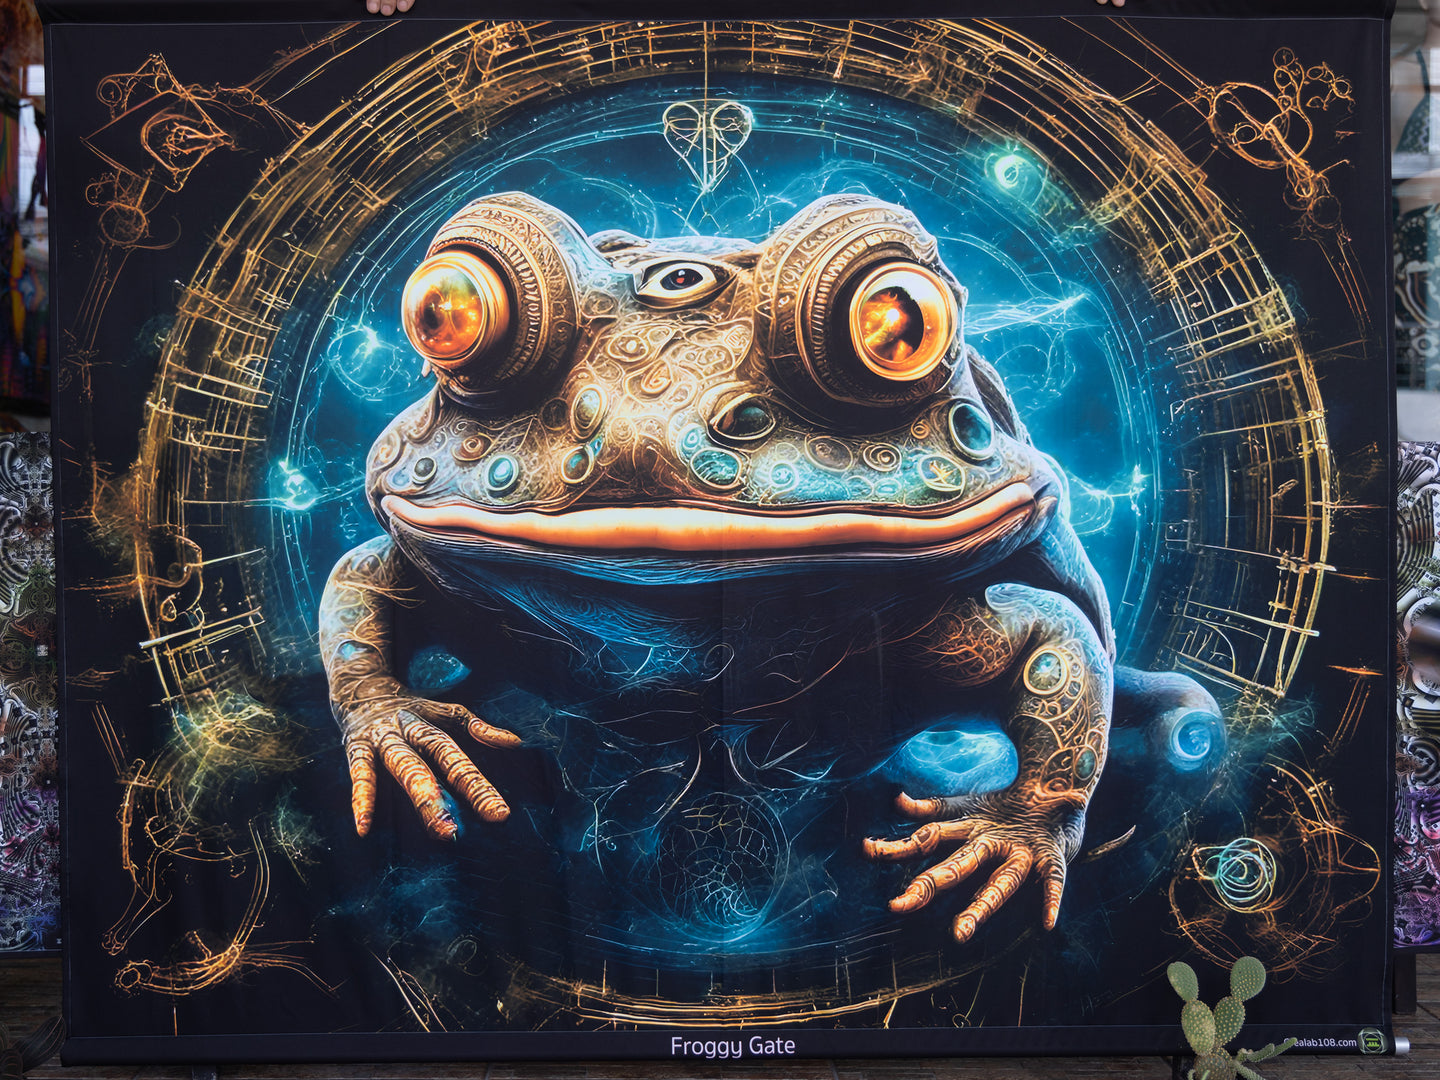 Buffo frog psychedelic UV tapestry wall hanging backdrop by Crealab108